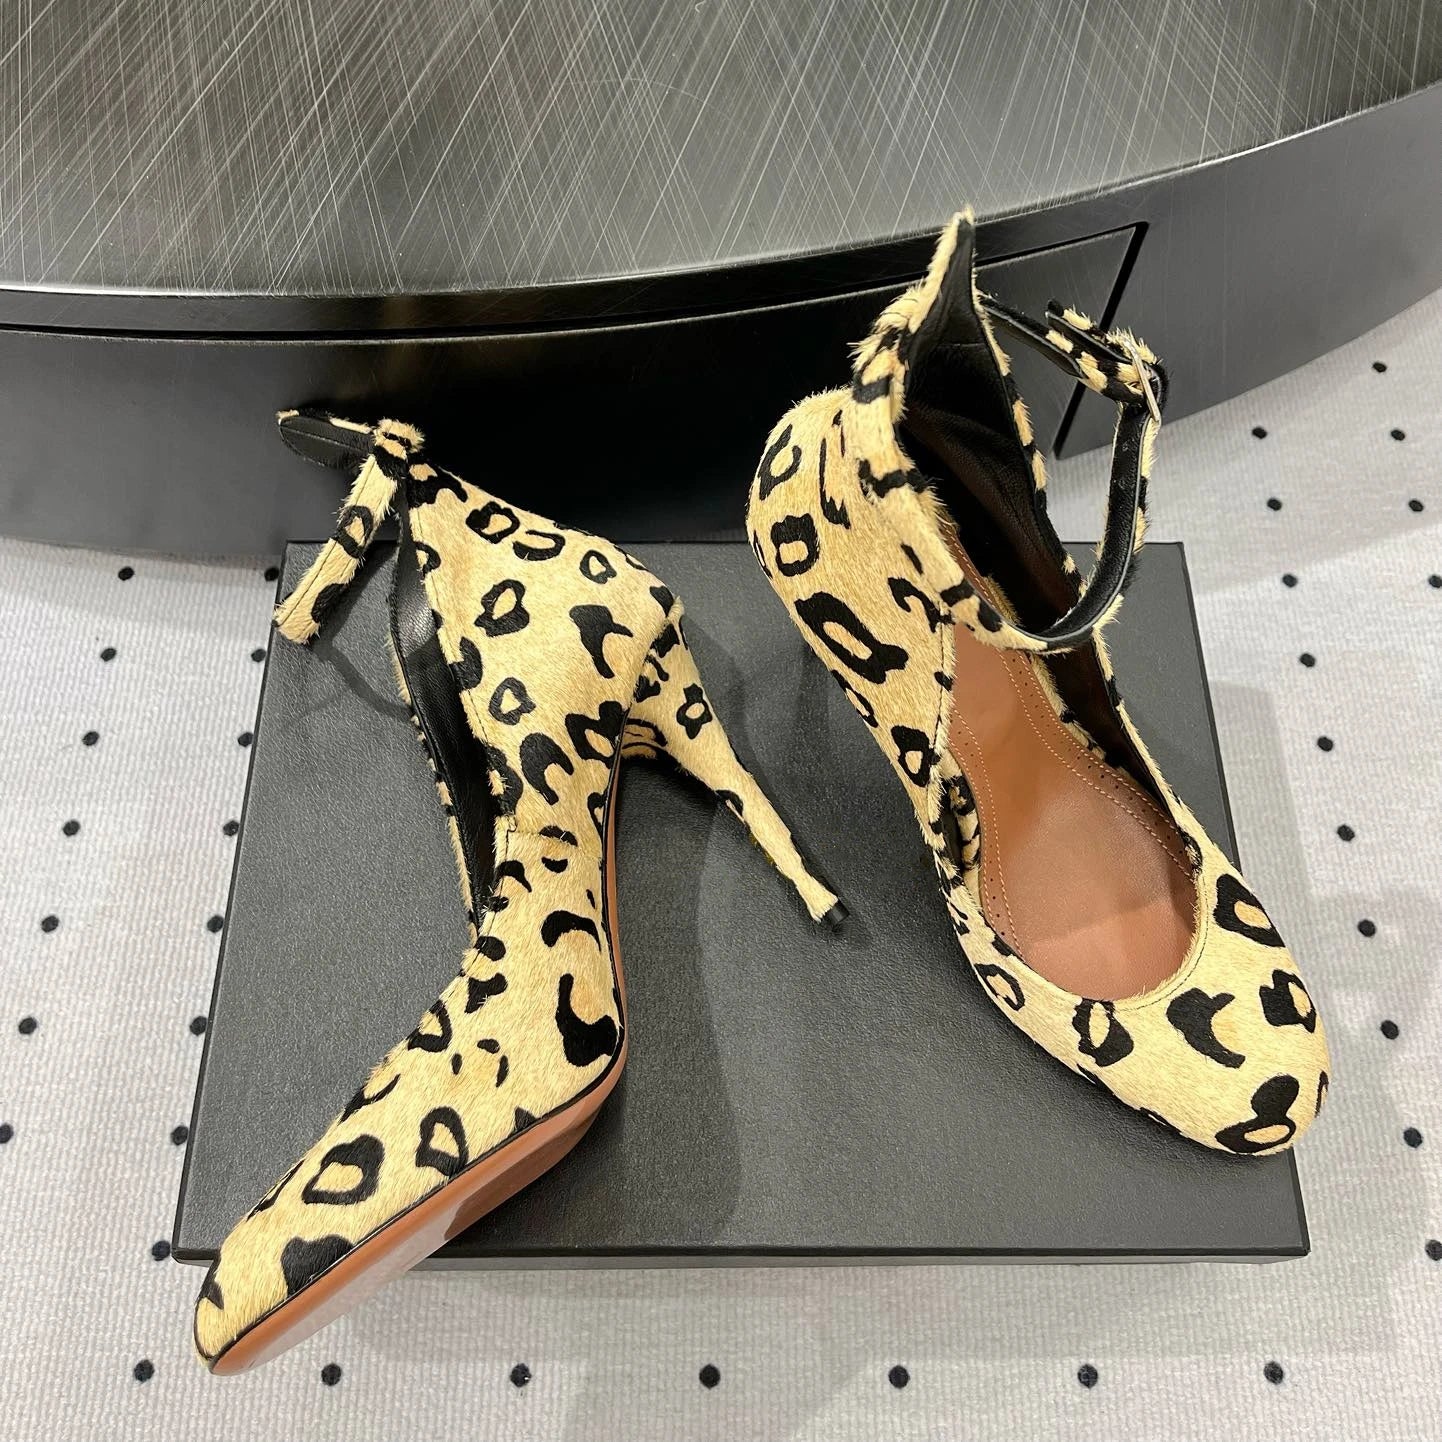 Shoes For Women Size35-42 Leopard Patent Leather Pumps Super High Heels Round-Toes Buckle Strap Designer Shoes Zapatos De Mujer